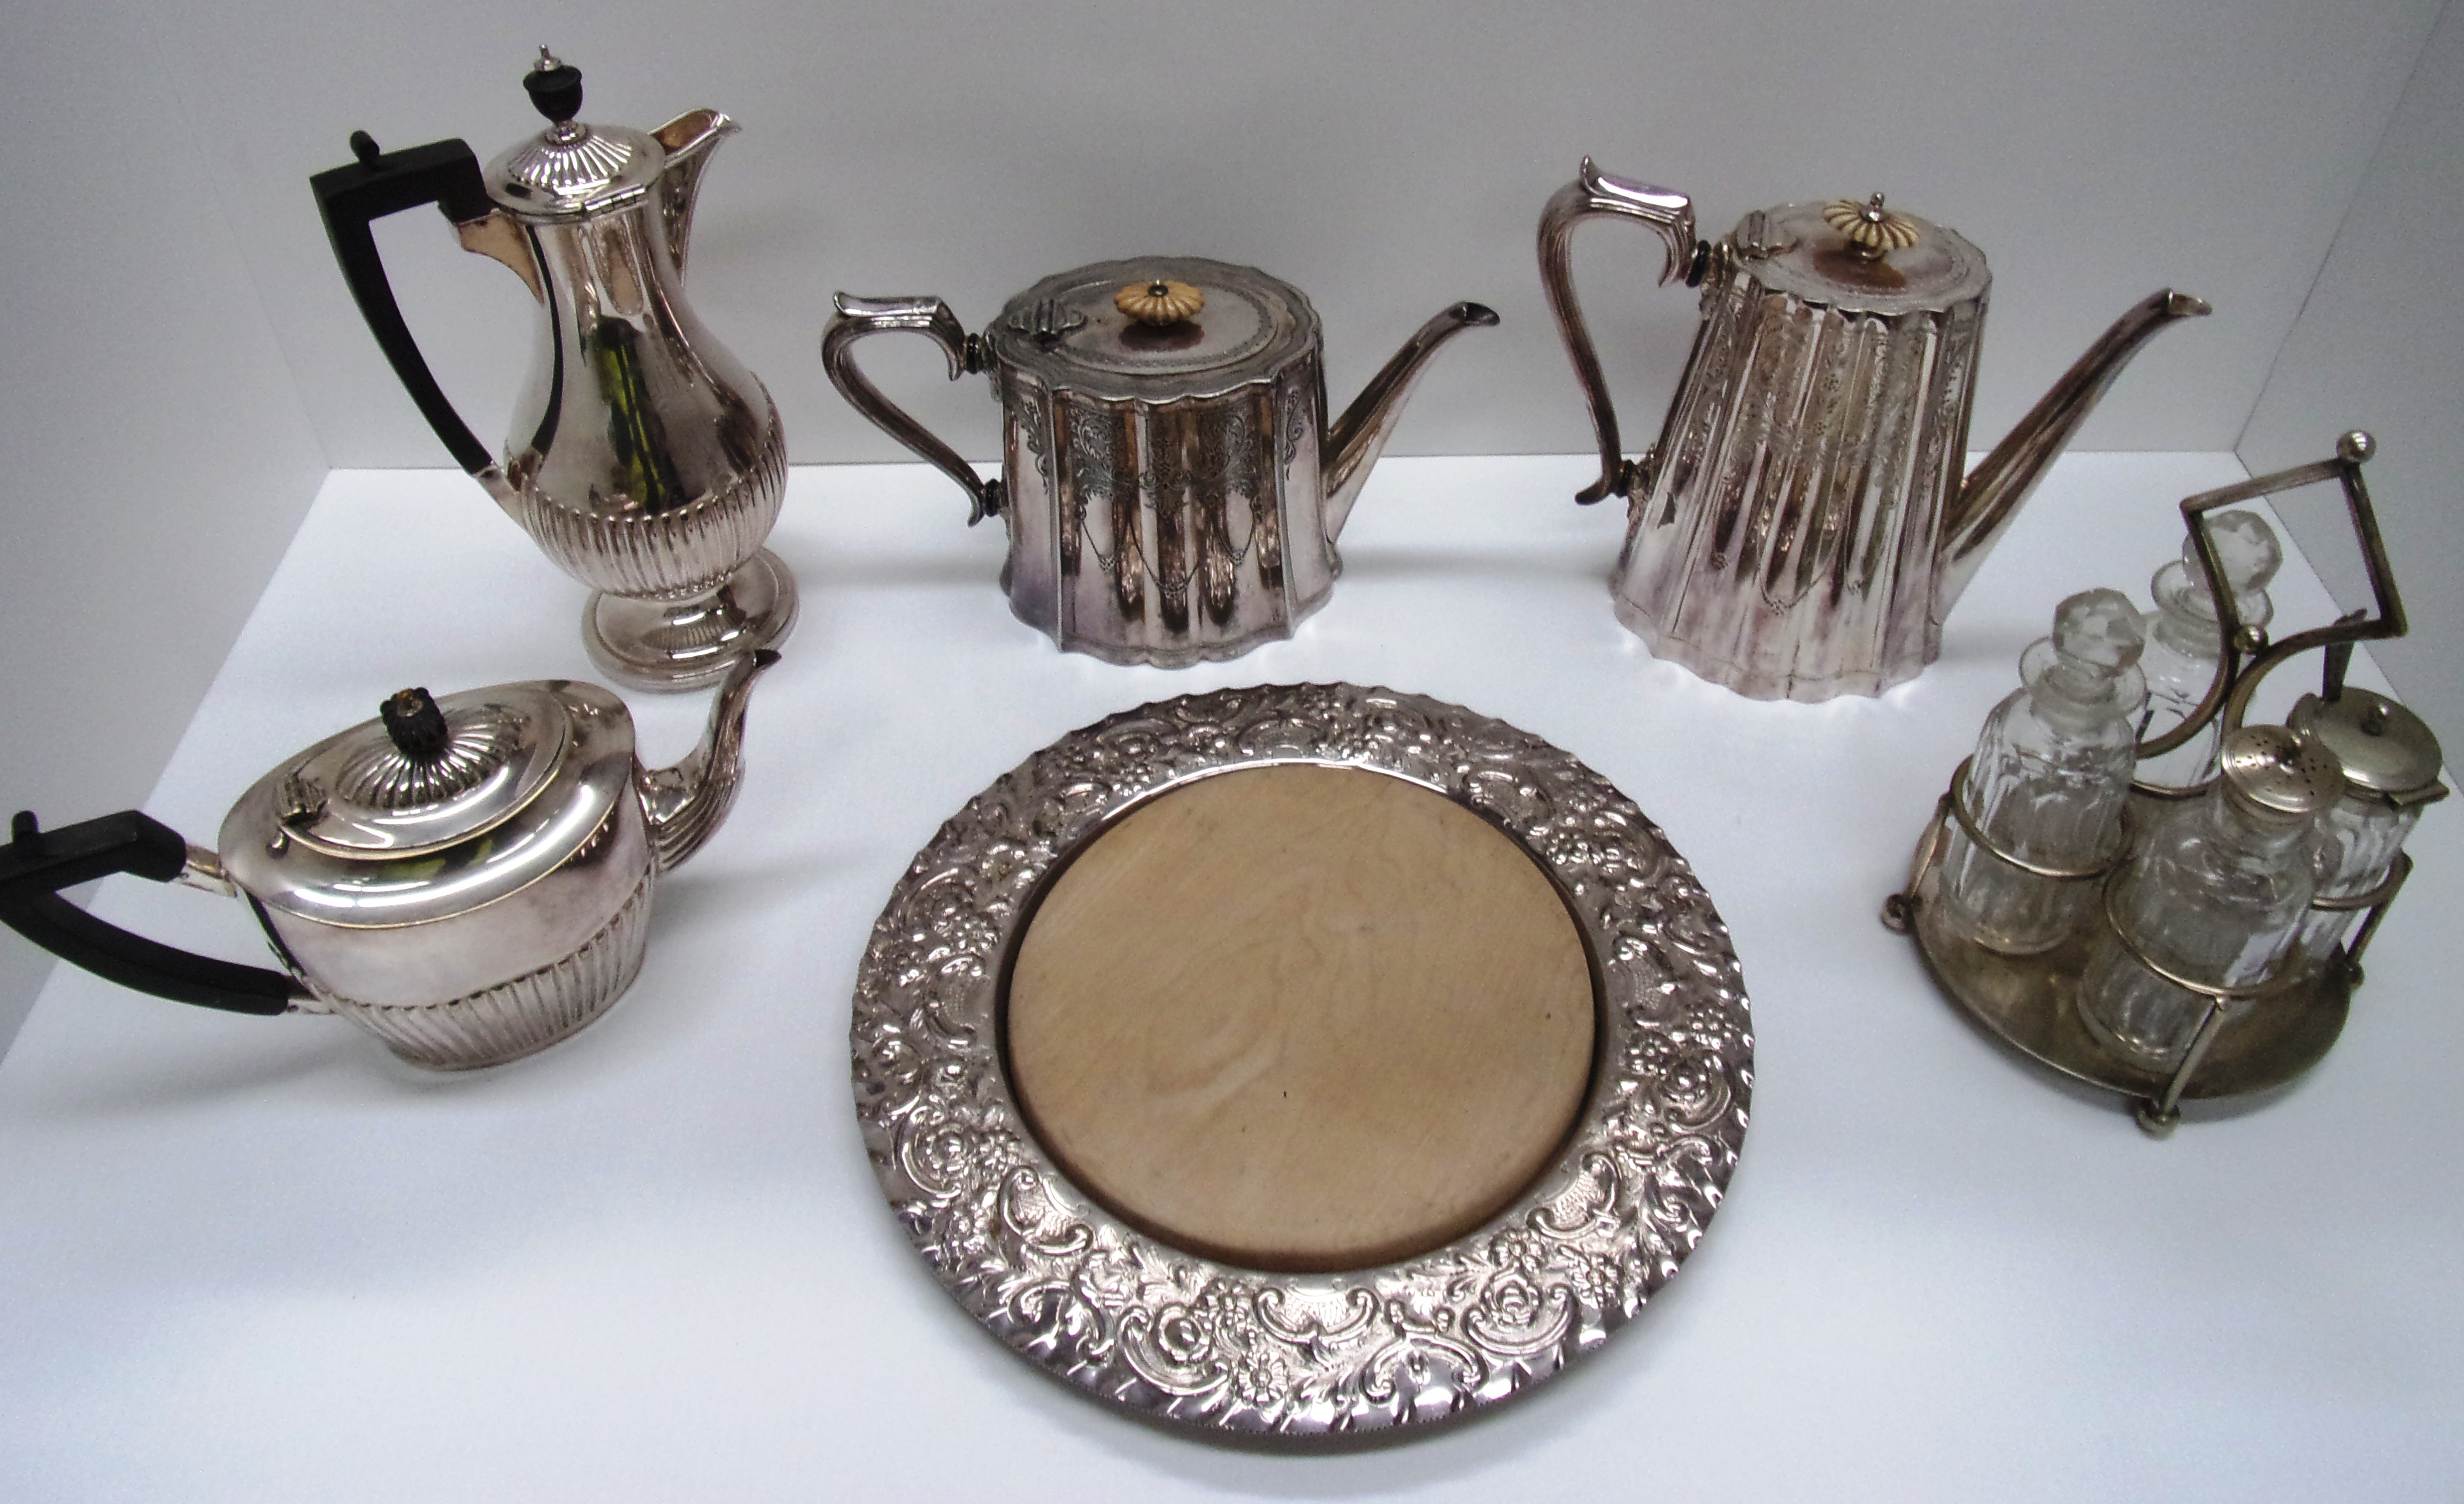 A plated teapot and hot water jug with e